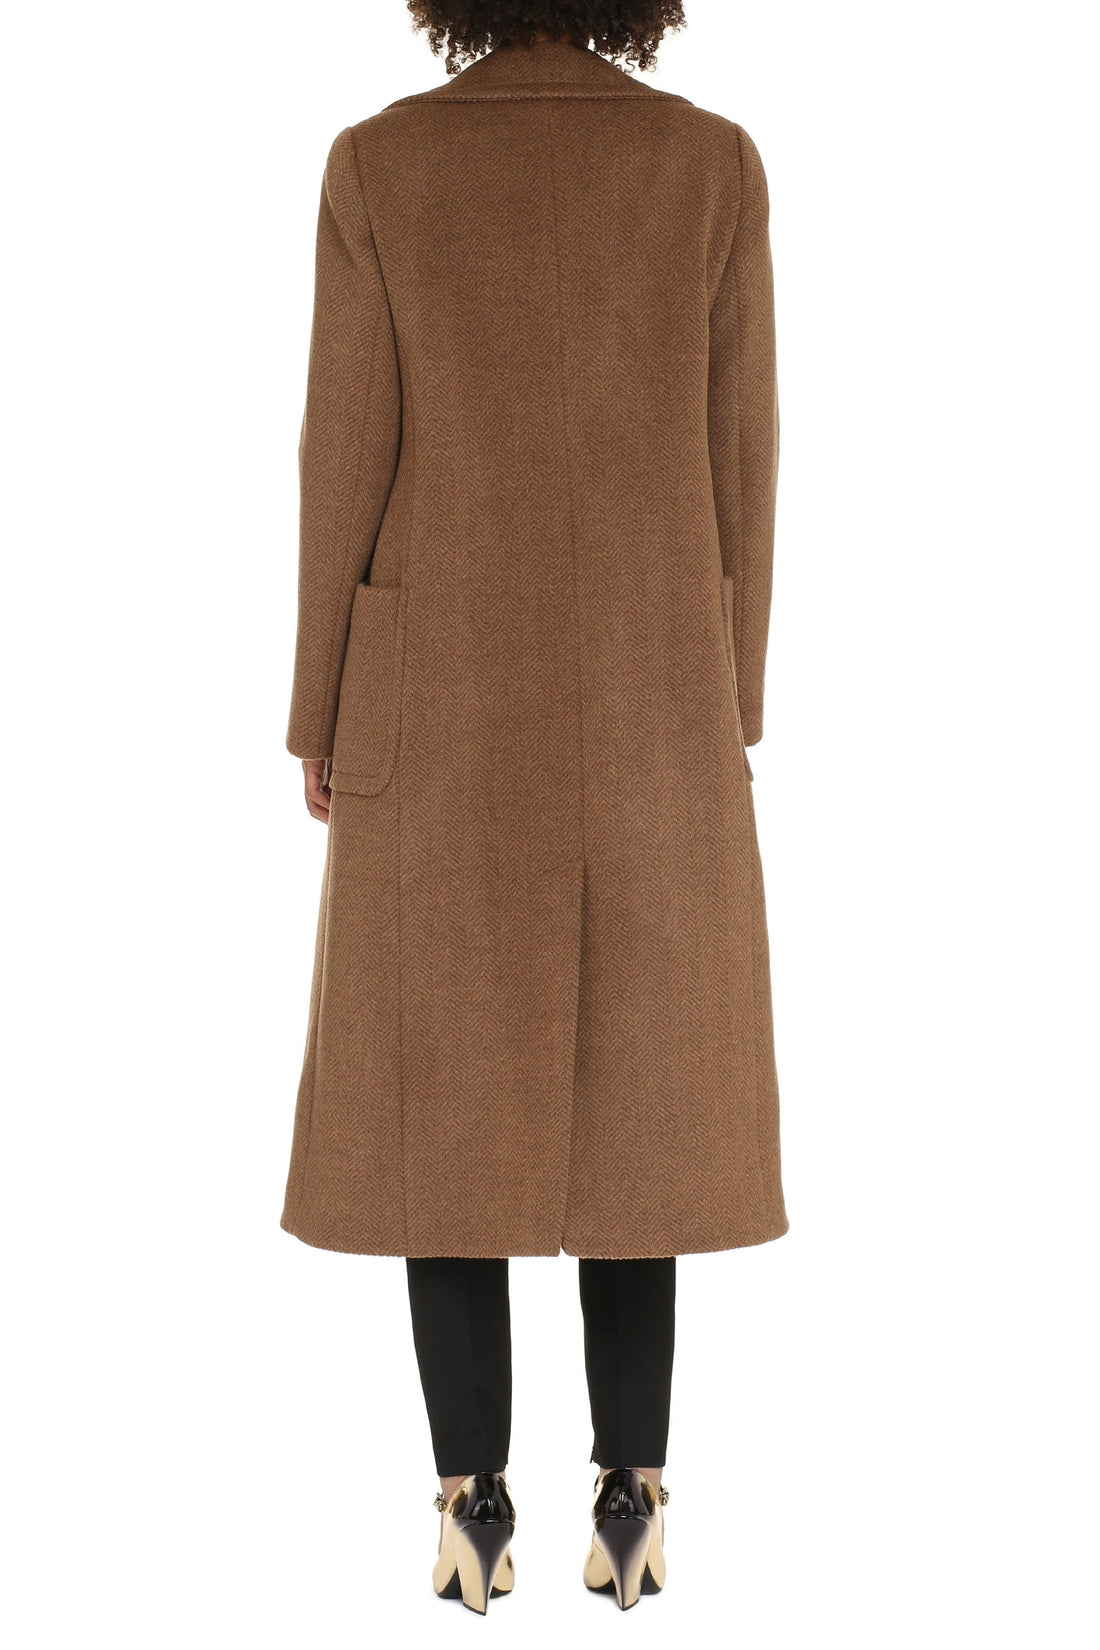 Stella McCartney-OUTLET-SALE-Double-breasted wool coat-ARCHIVIST